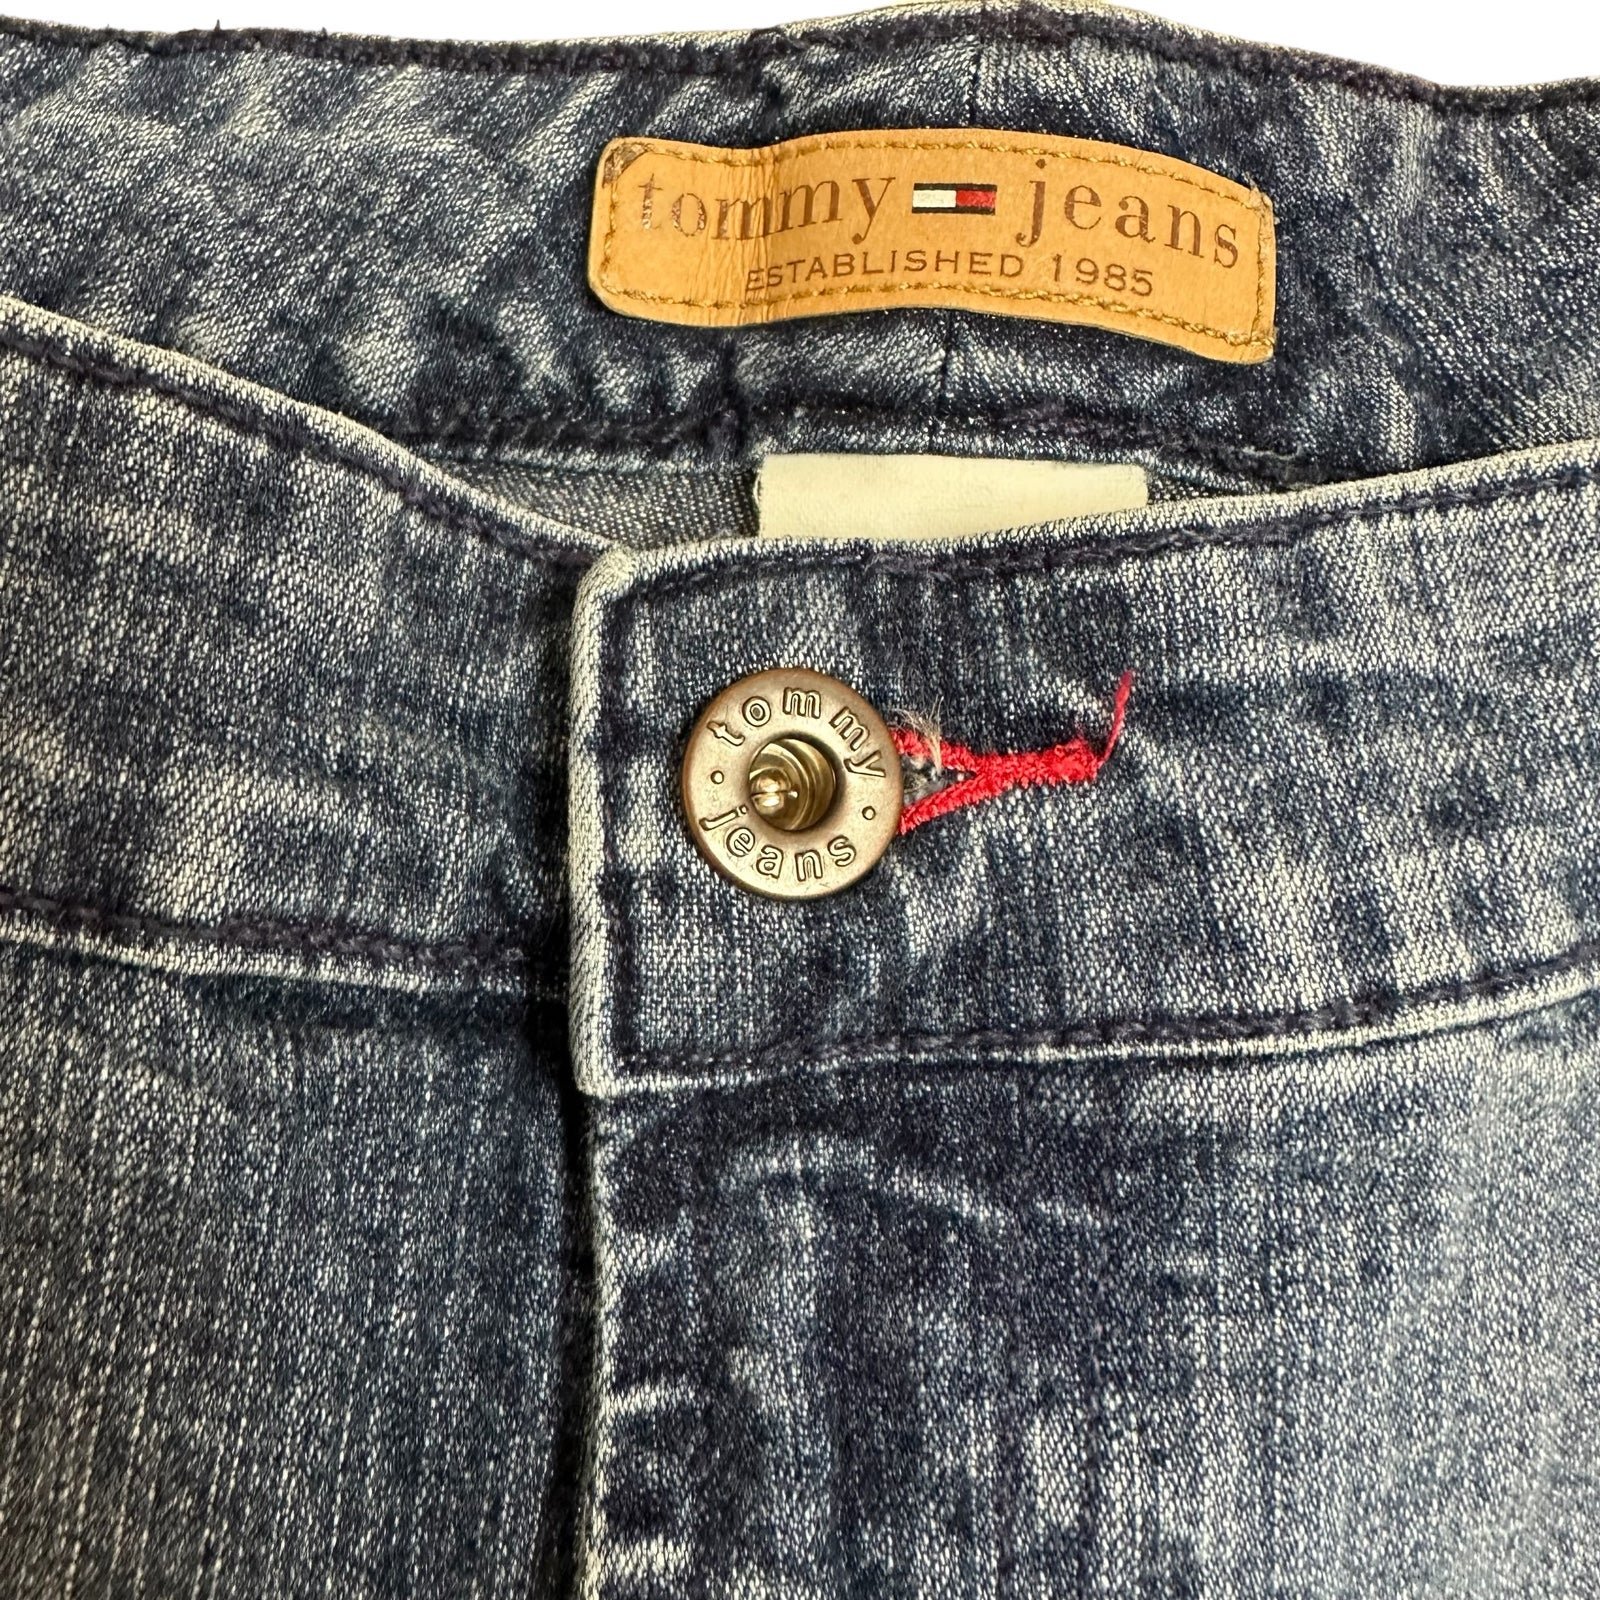 Gorgeous VTG TOMMY JEANS Women Juniors 9 UTILITY CARGO Pockets FLARE Leg Stretch Denim Opo4l07vY Buying Cheap